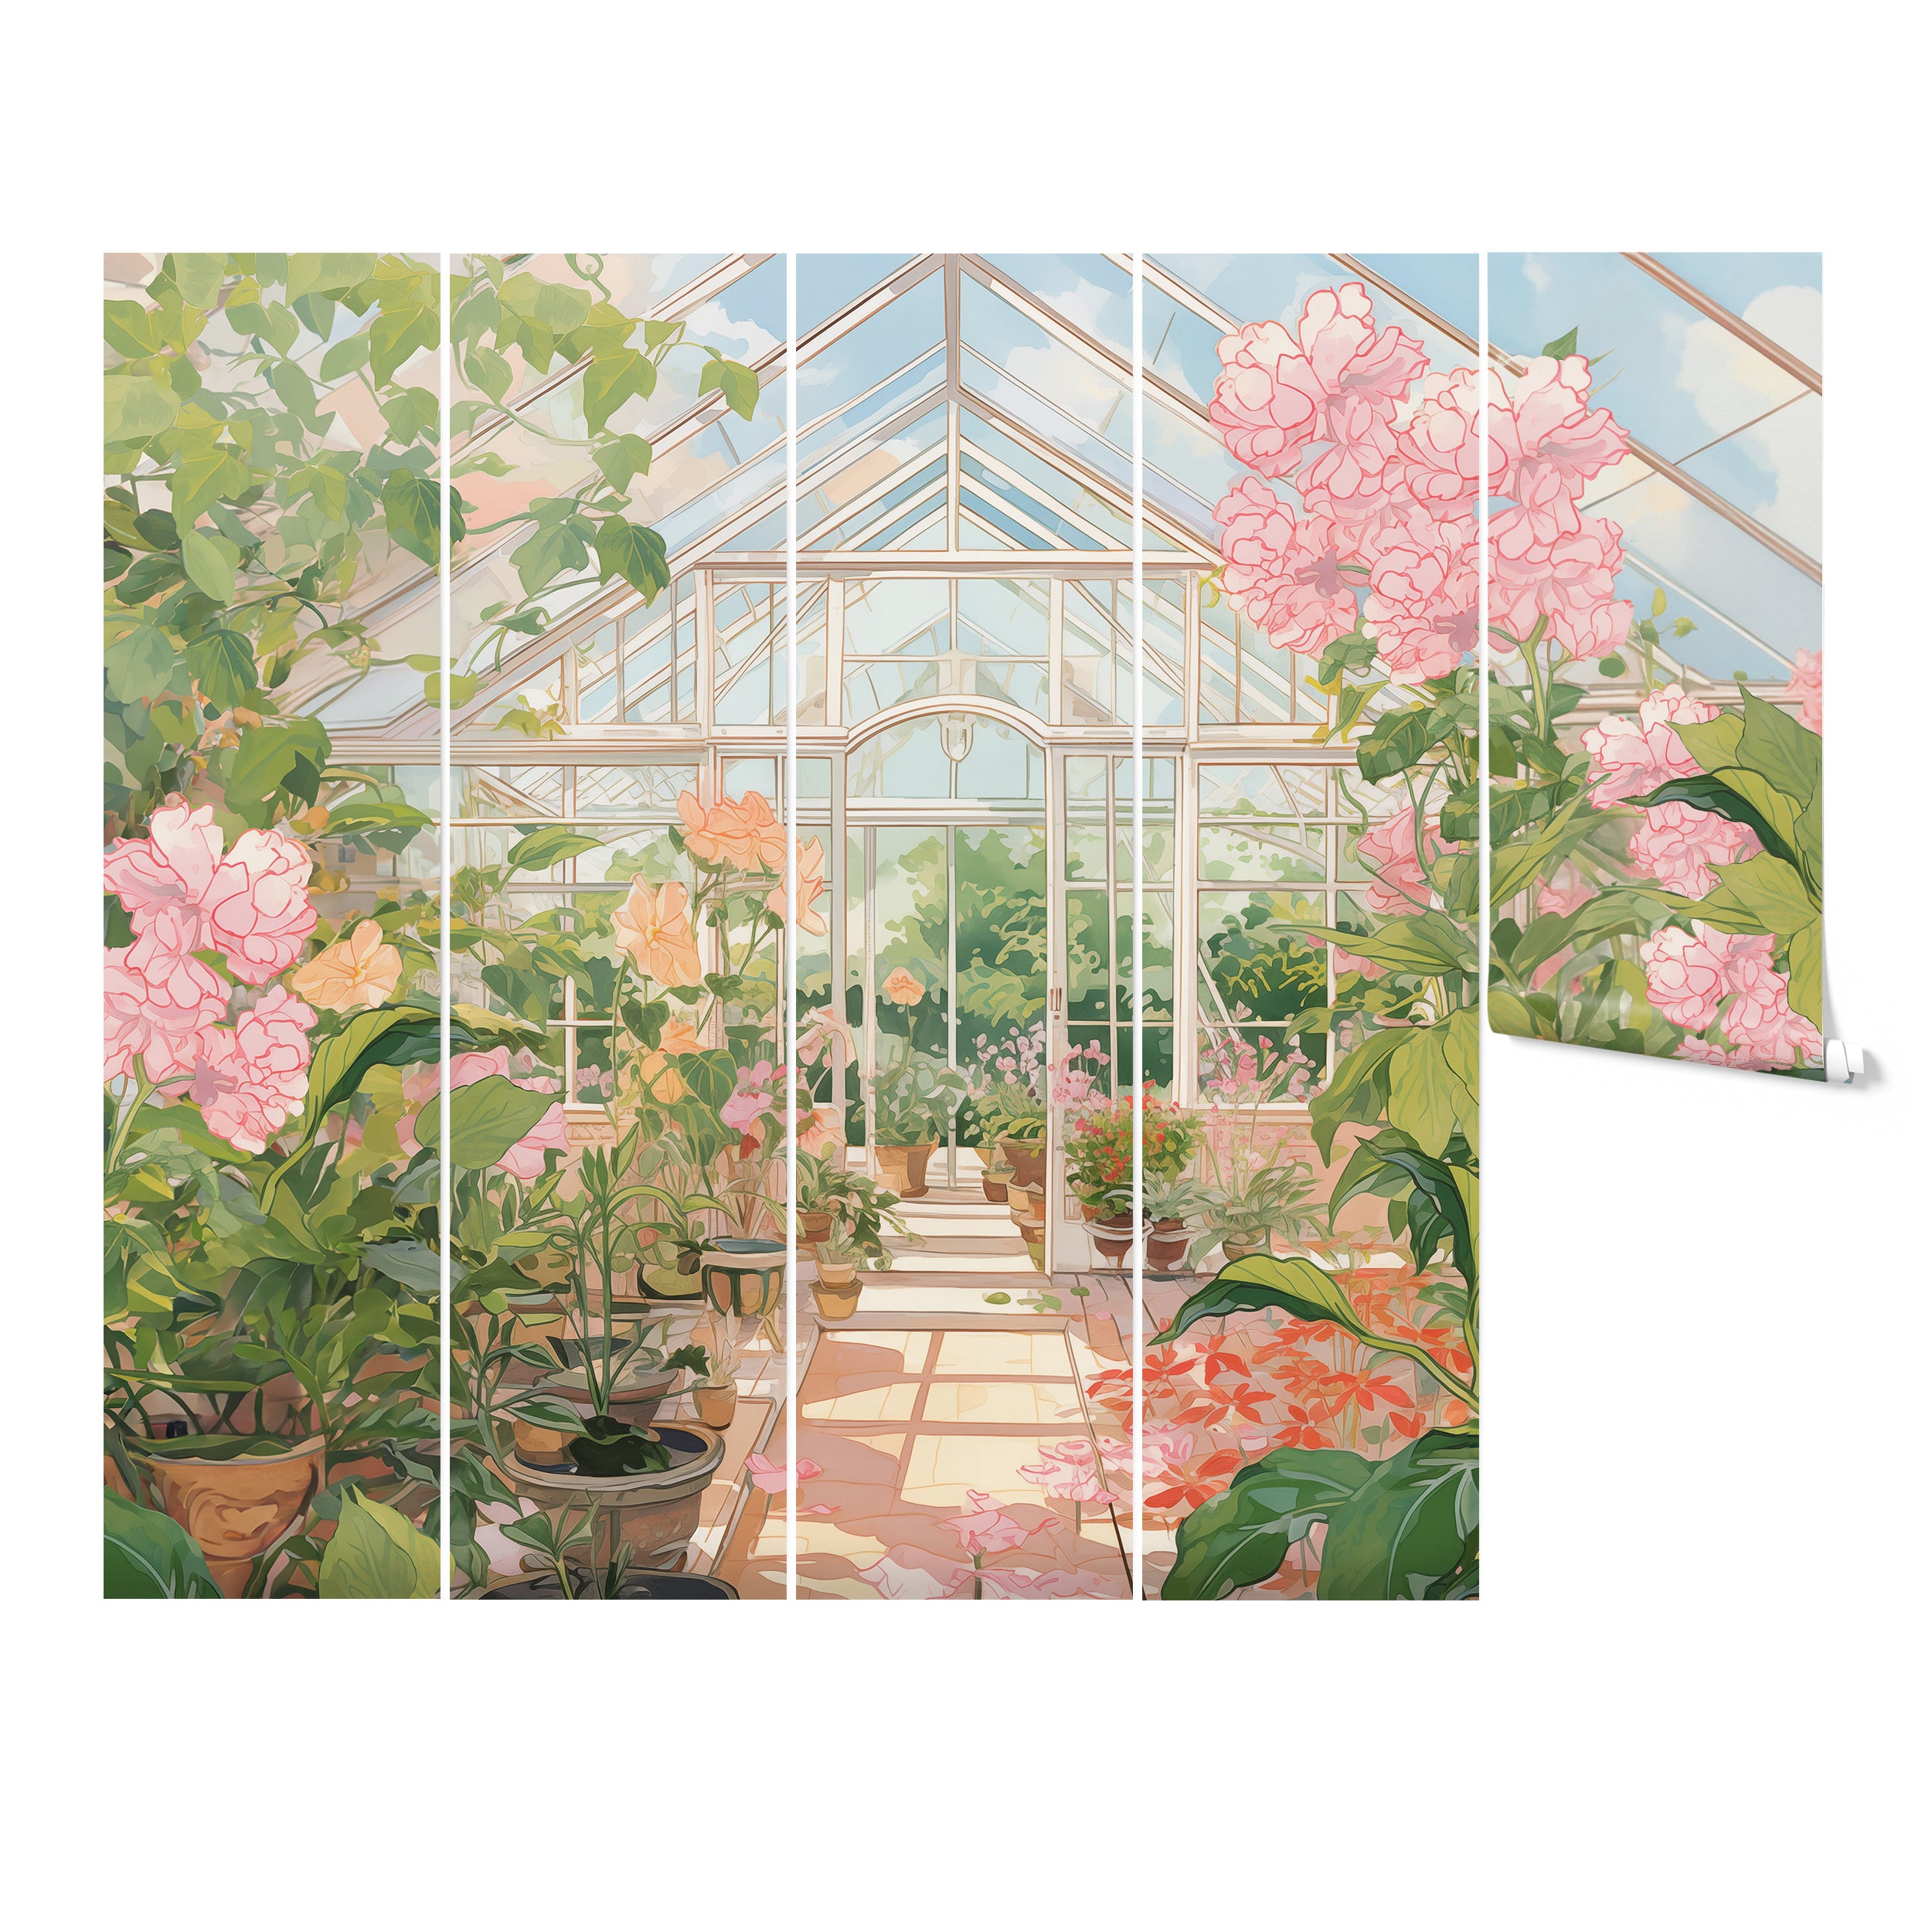 Segmented wall panels of a garden house mural showcasing a detailed and colorful greenhouse filled with flowers